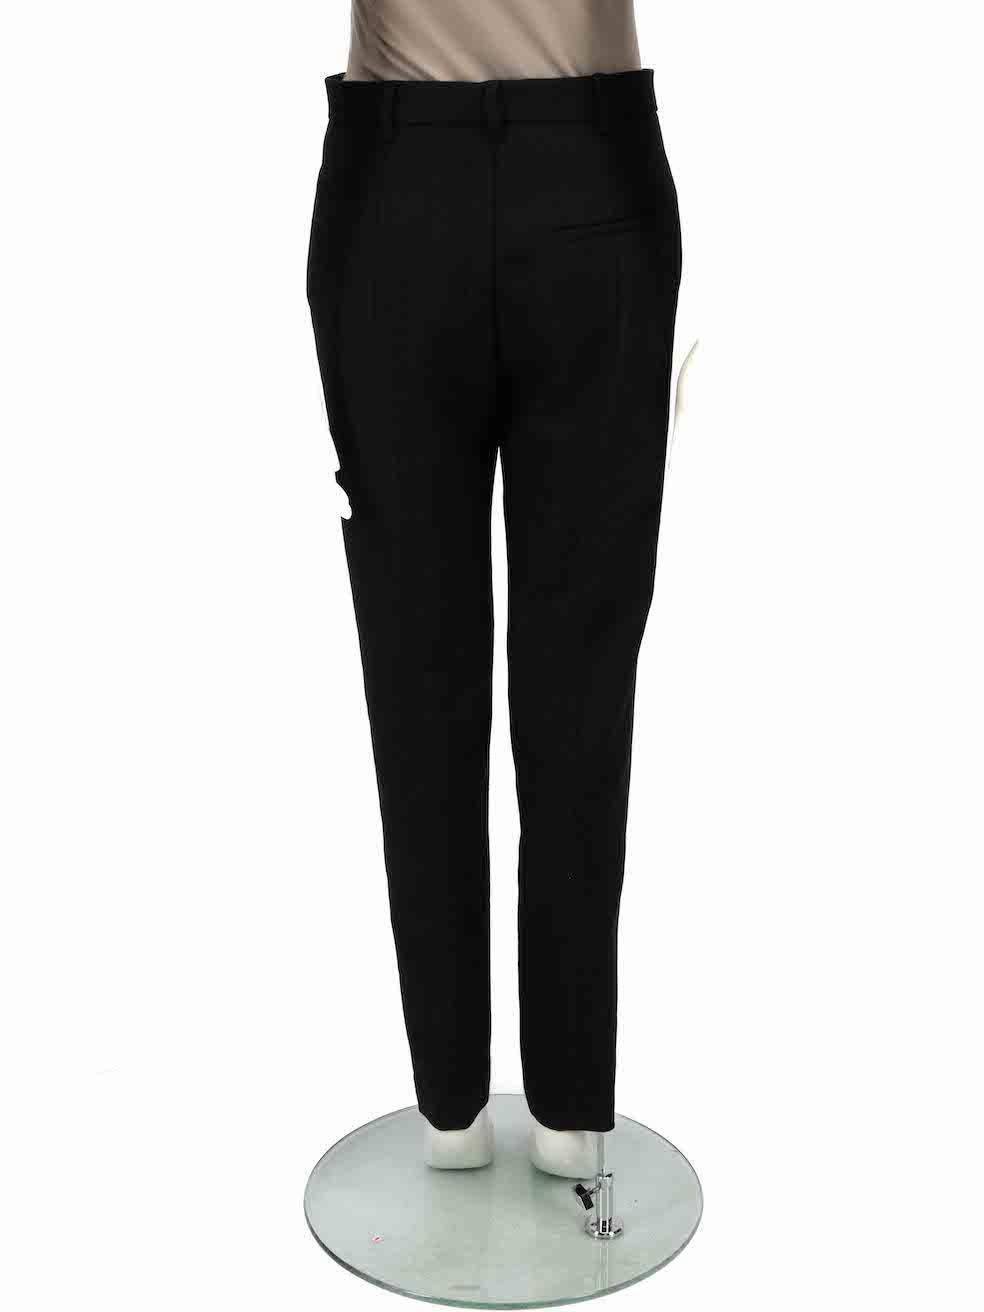 Jil Sander Black Wool Slim Fit Tailored Trousers Size M In Good Condition For Sale In London, GB